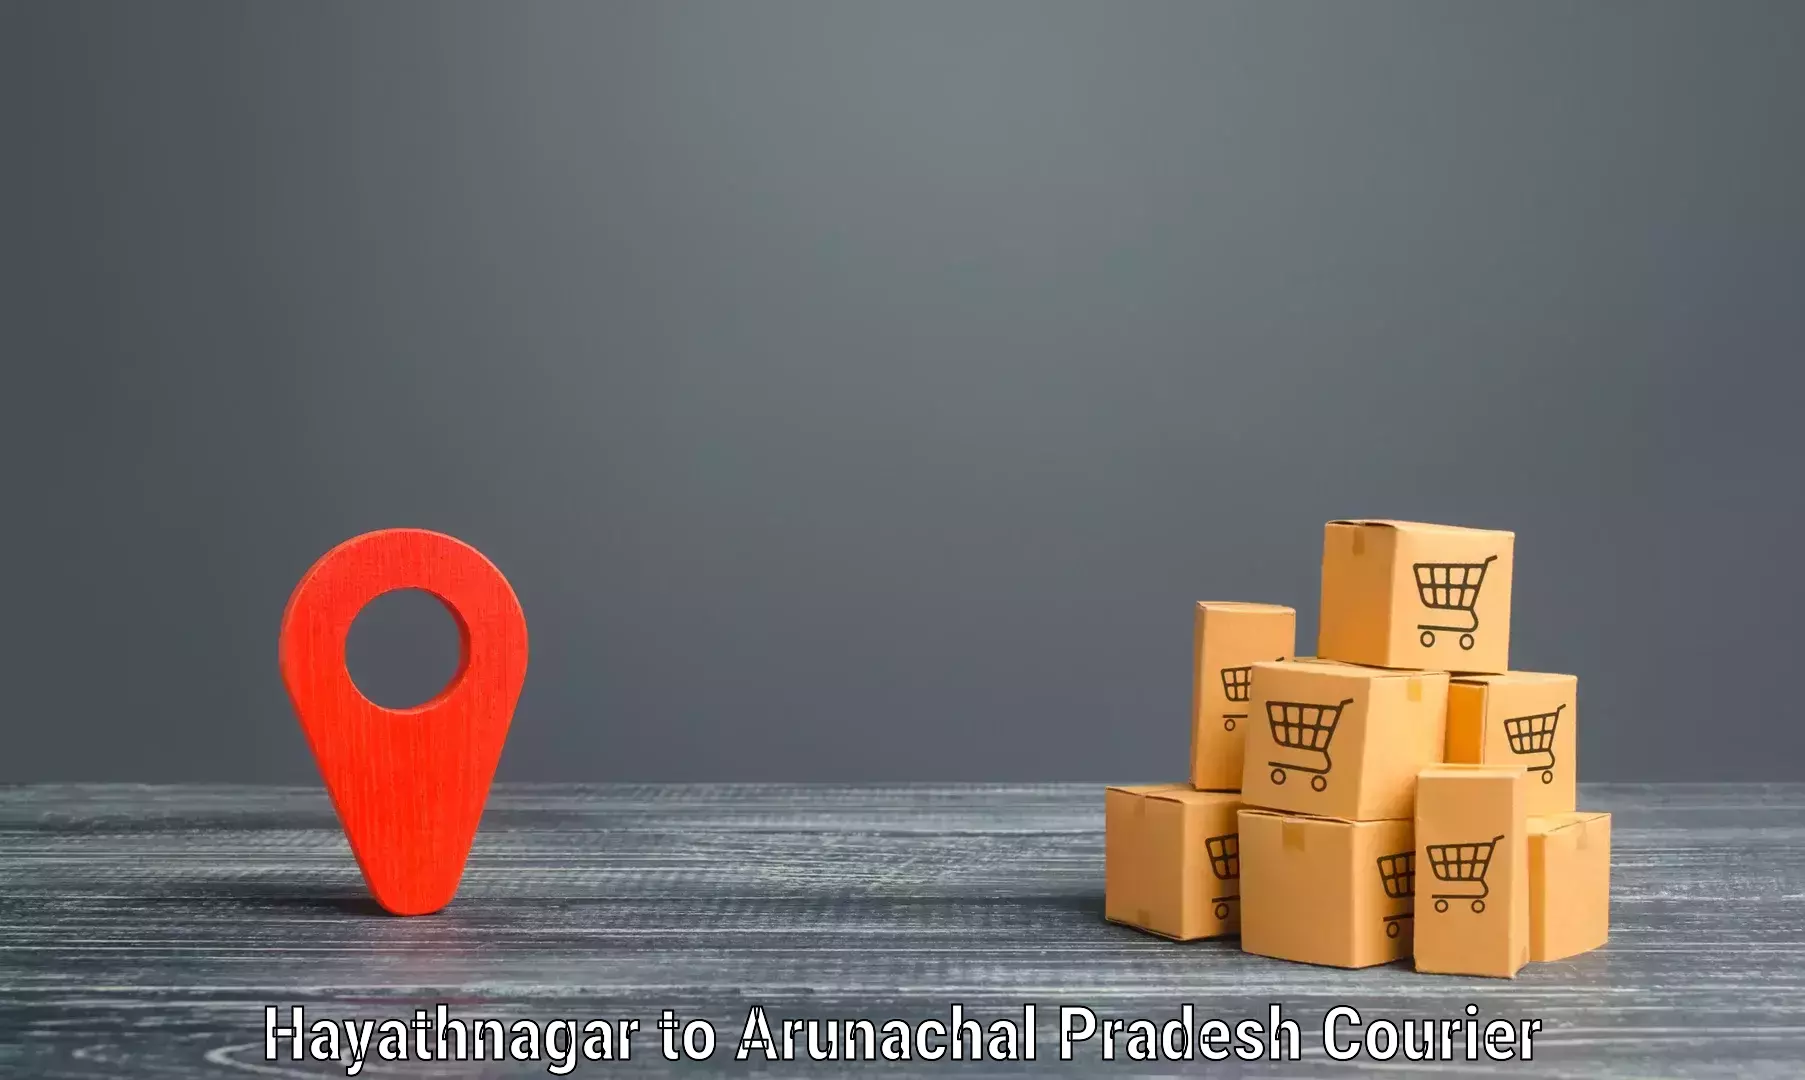 State-of-the-art courier technology Hayathnagar to Dibang Valley